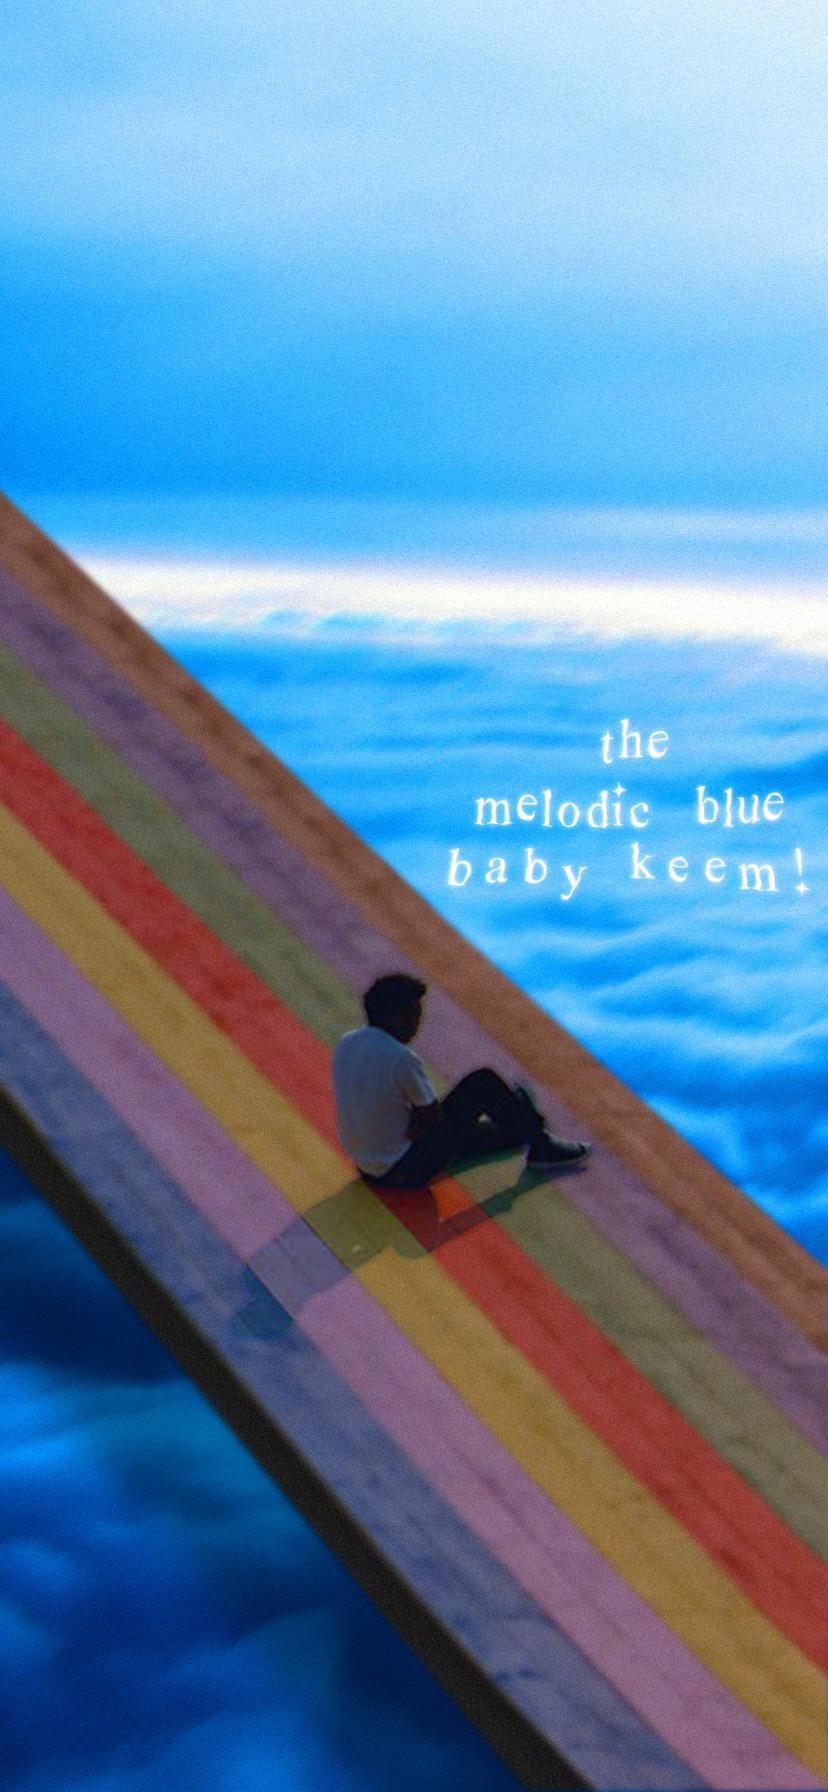 Melodic Blue phone wallpaper with parental advisorywithout parental  advisory by me  rBabyKeem